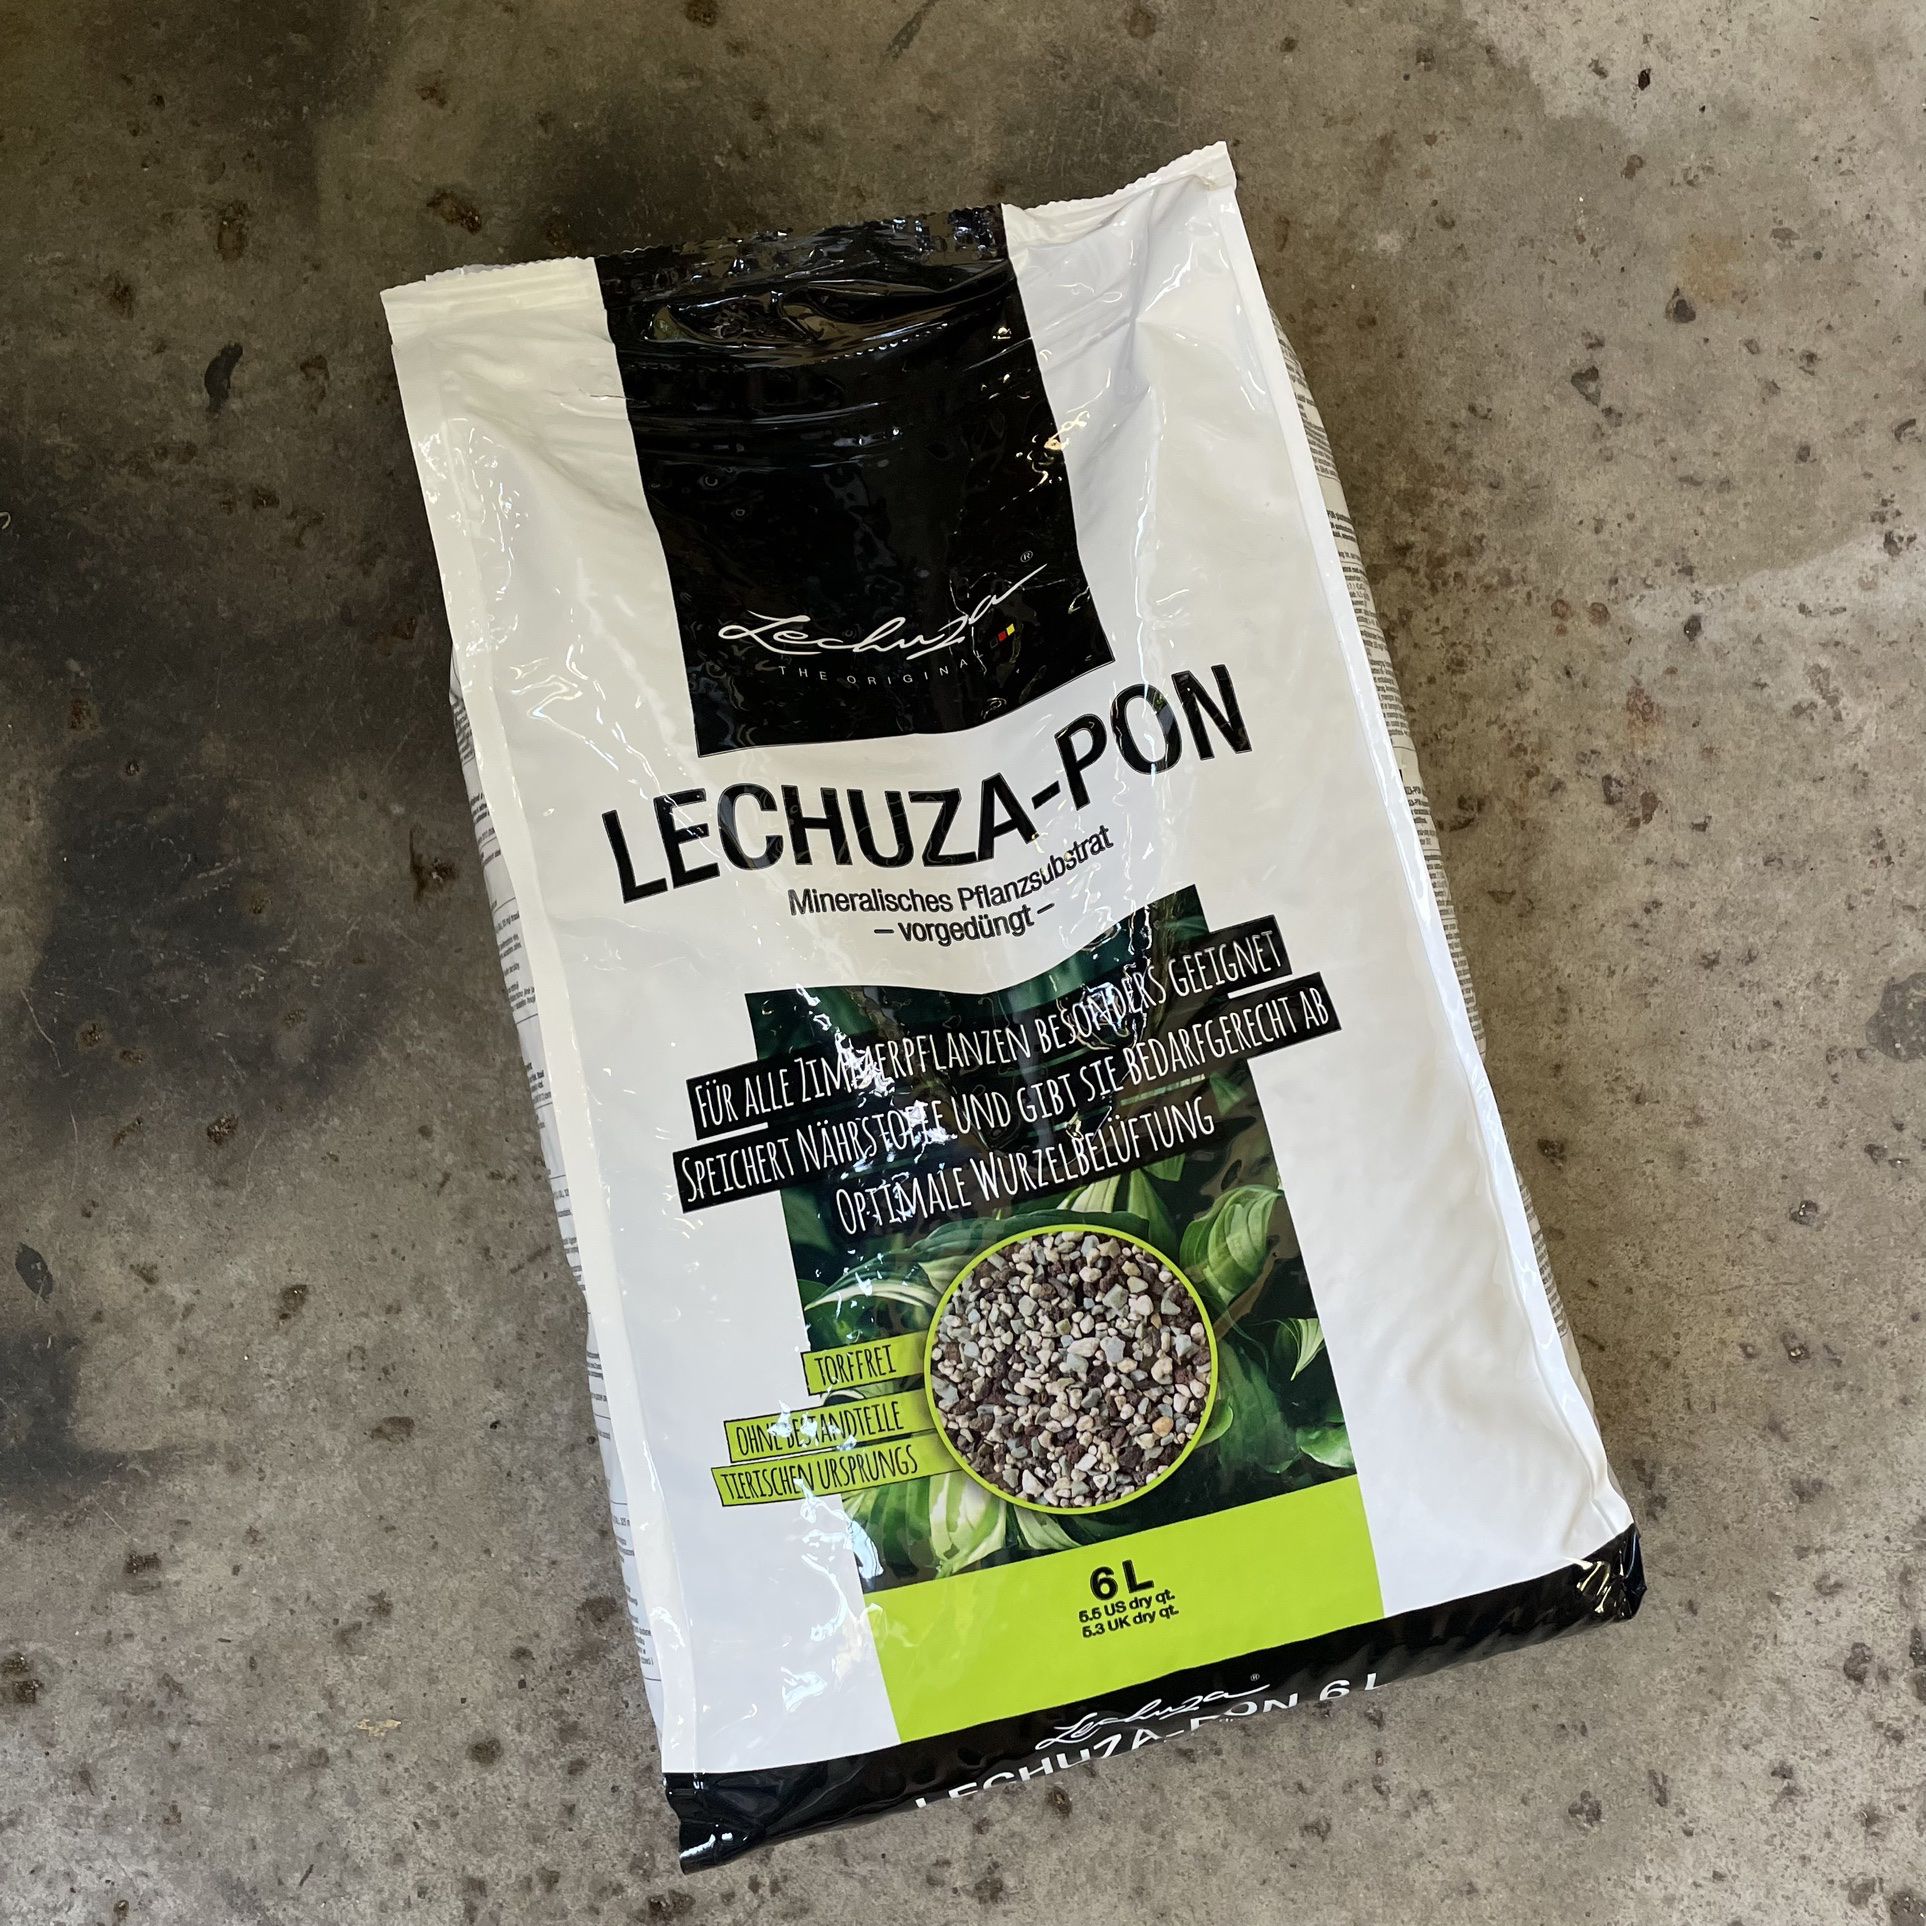 Lechuza Pon Substrate 6 Liter Brand New for Sale in El Cajon, CA - OfferUp